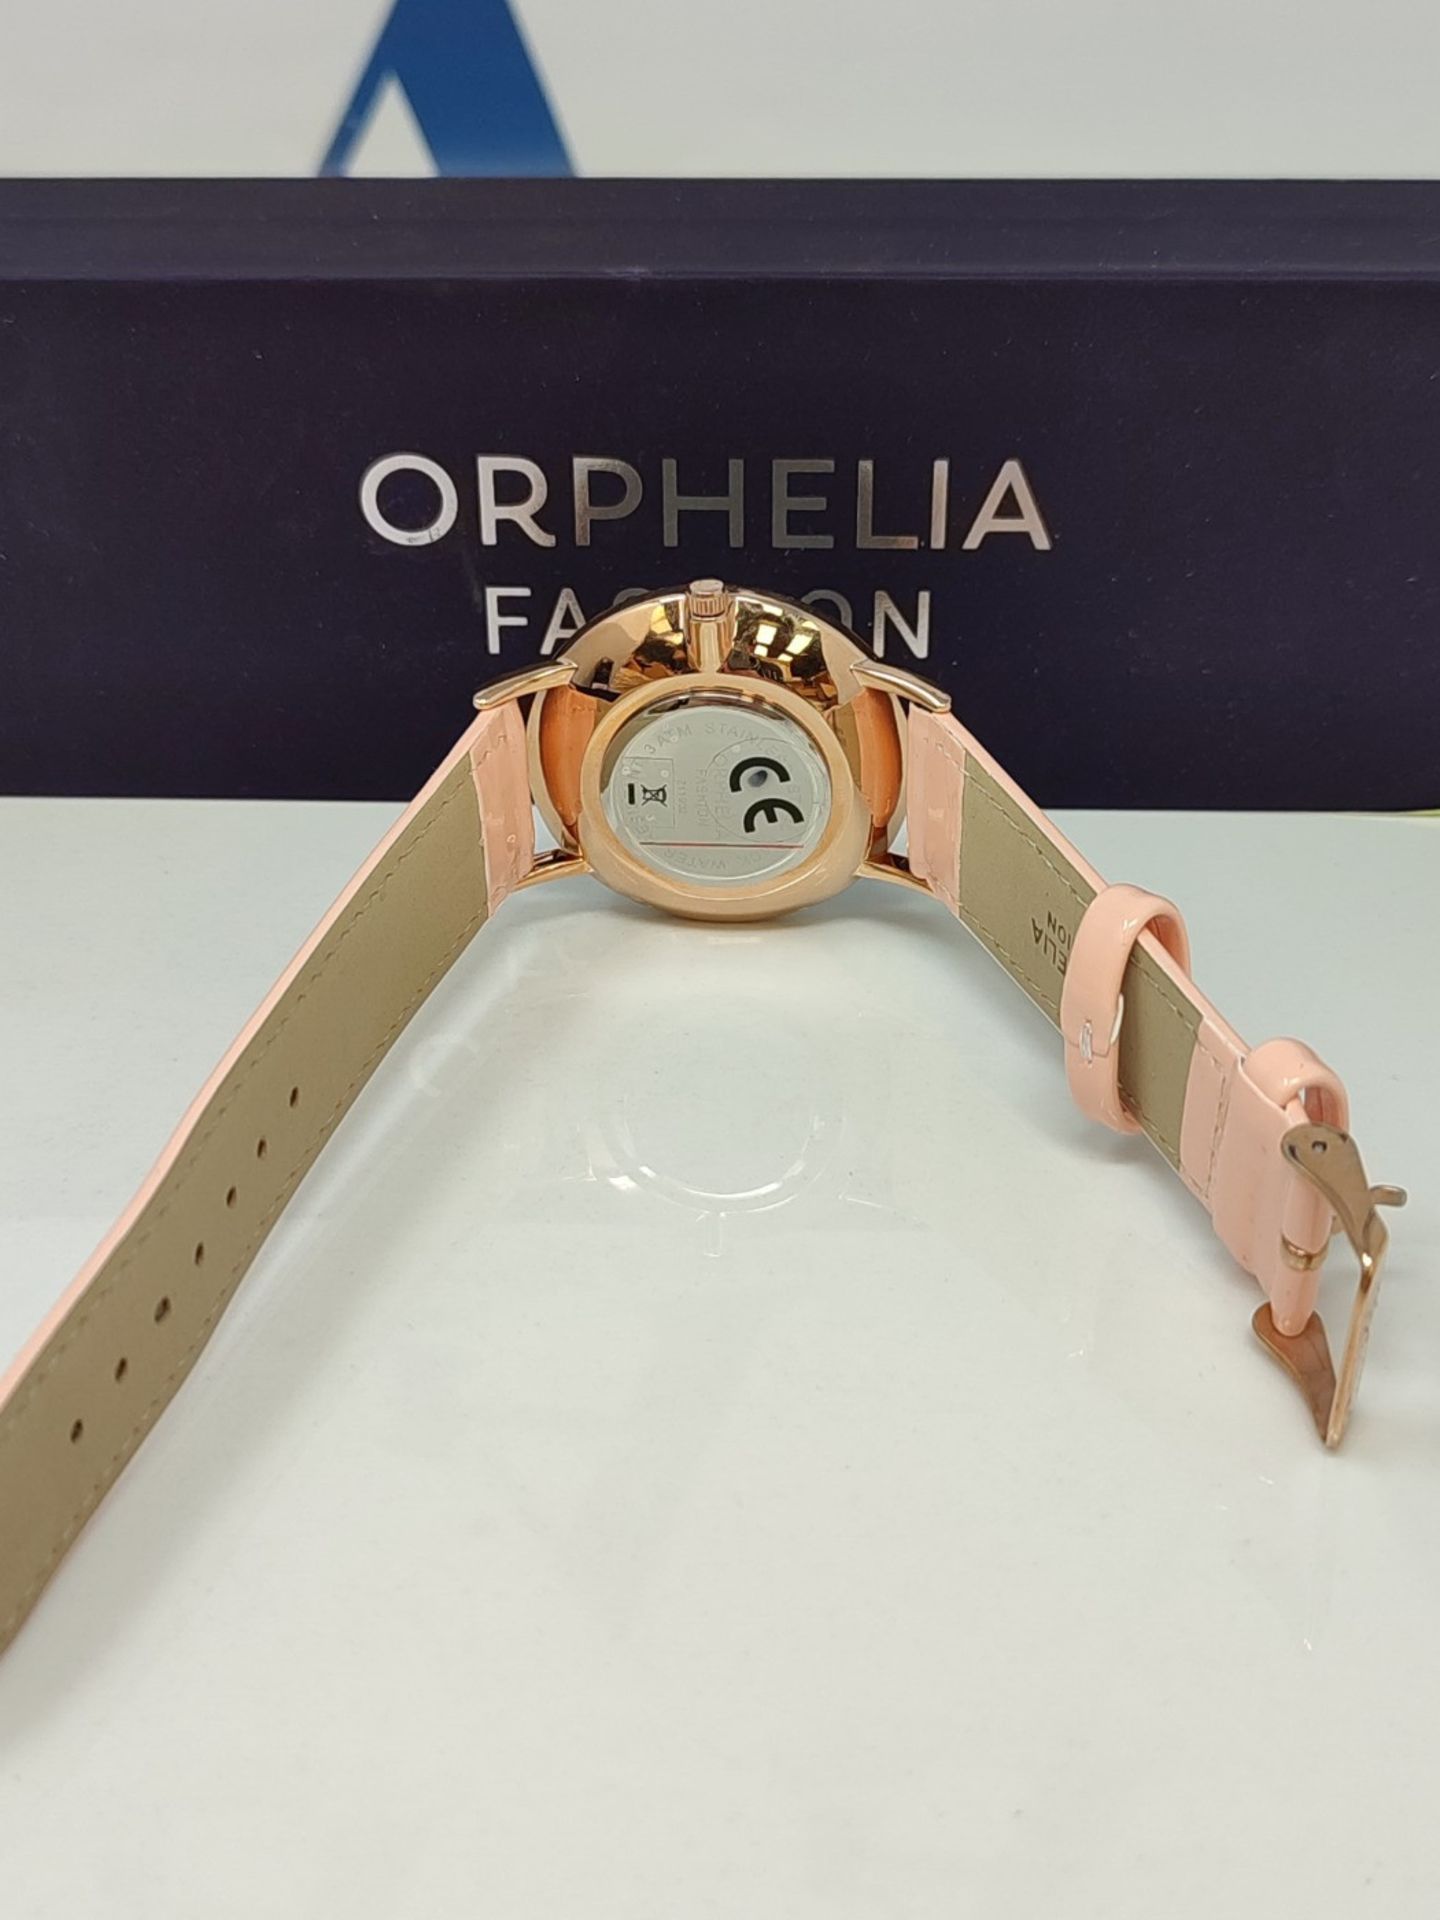 Orphelia Fashion Women's Analog Watch Petal Blossom with Leather Strap, Pink - Image 3 of 3